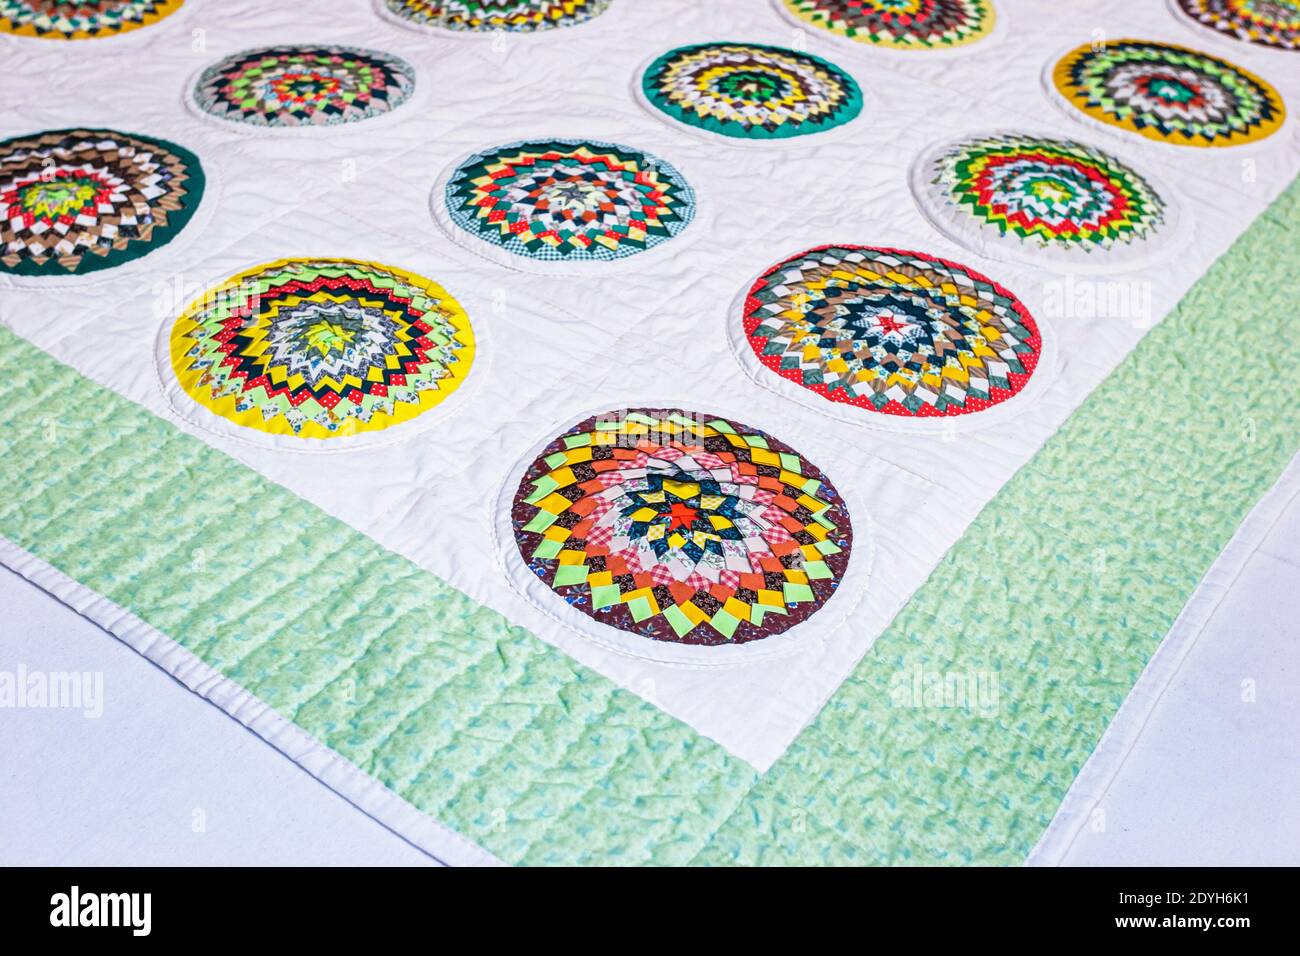 Alabama Montgomery State Department of Archives & History,Pine Burr State Quilt detail, Stock Photo